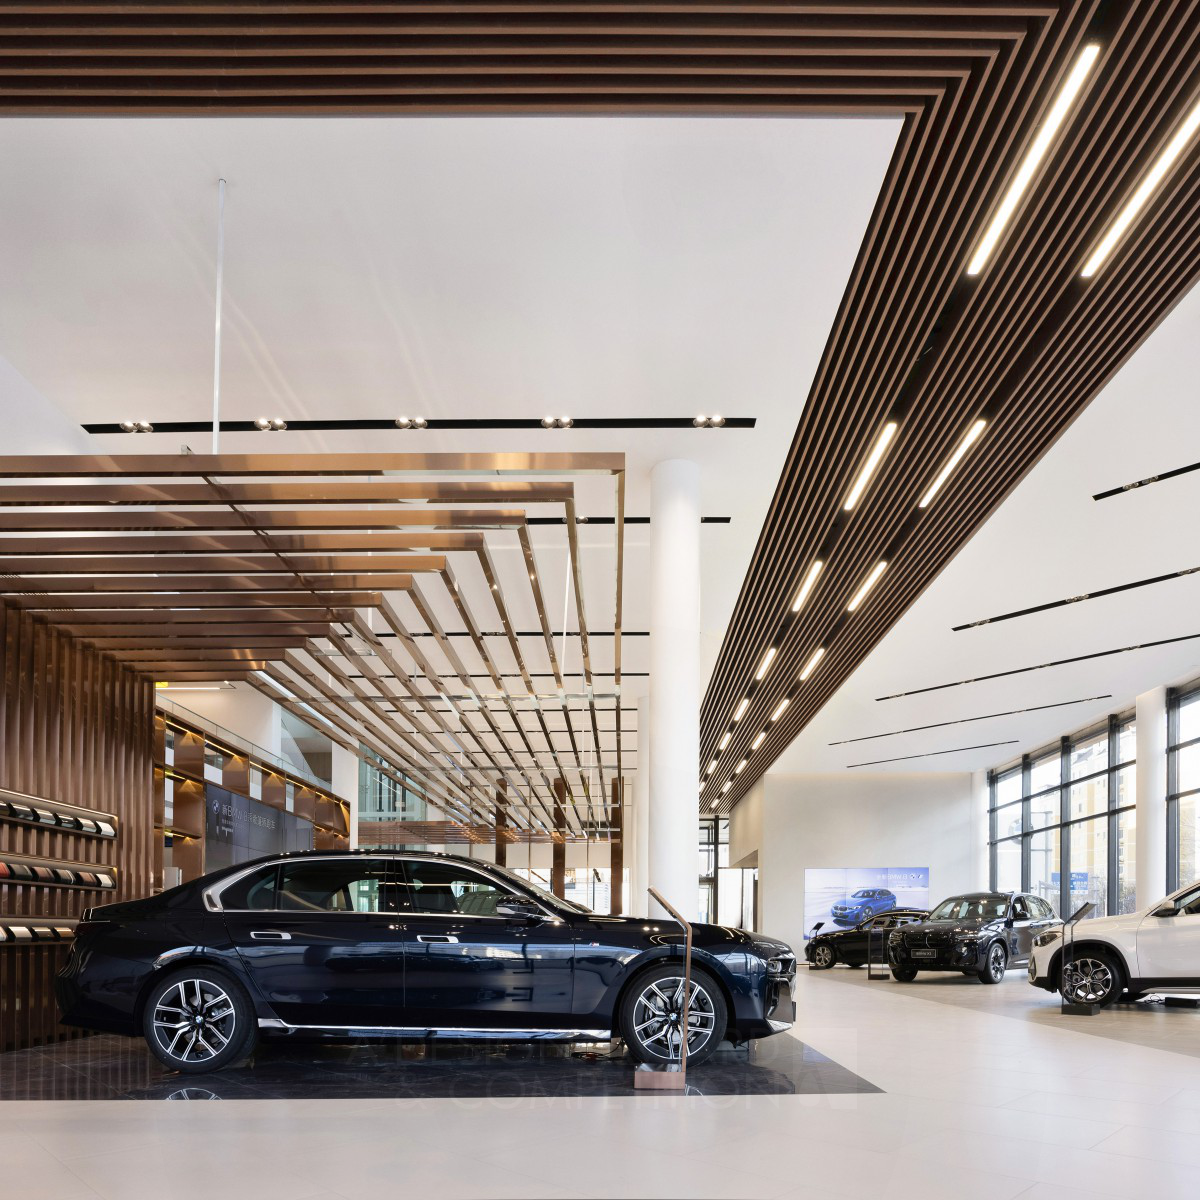 Yixian Chen wins Silver at the prestigious A' Interior Space, Retail and Exhibition Design Award with Rongbaohang BMW 5S Store.